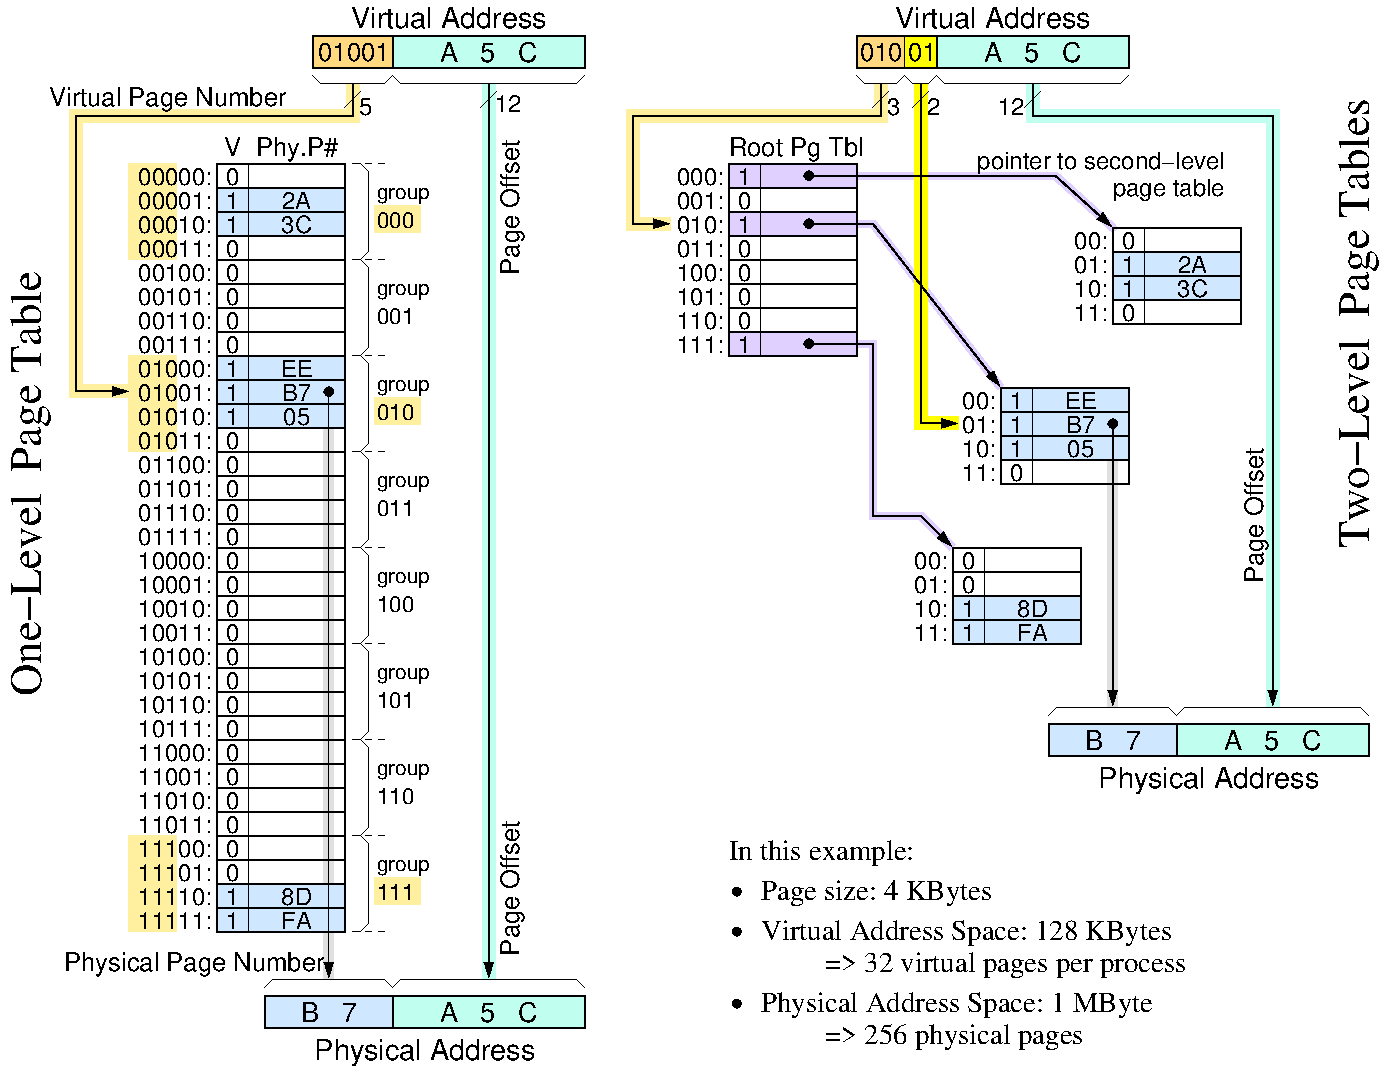 A 32-entry one-level page table broken down into two levels, consisting of an 8-entry root page table followed by 4-entry second-level tables